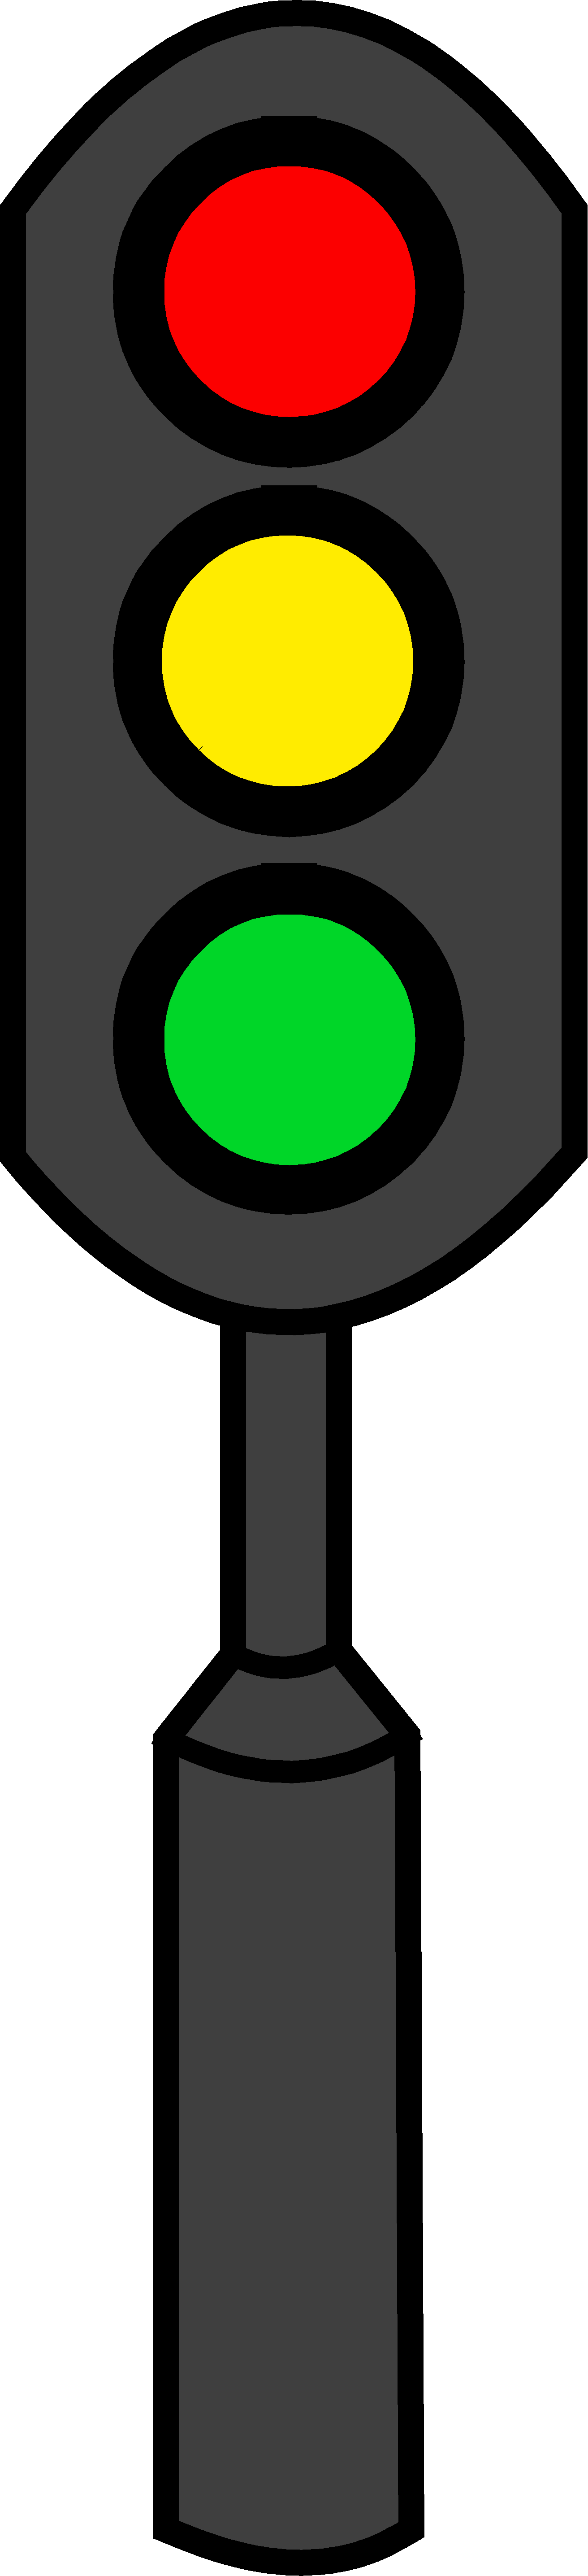 Traffic Light Clipart - Free Clipart Images